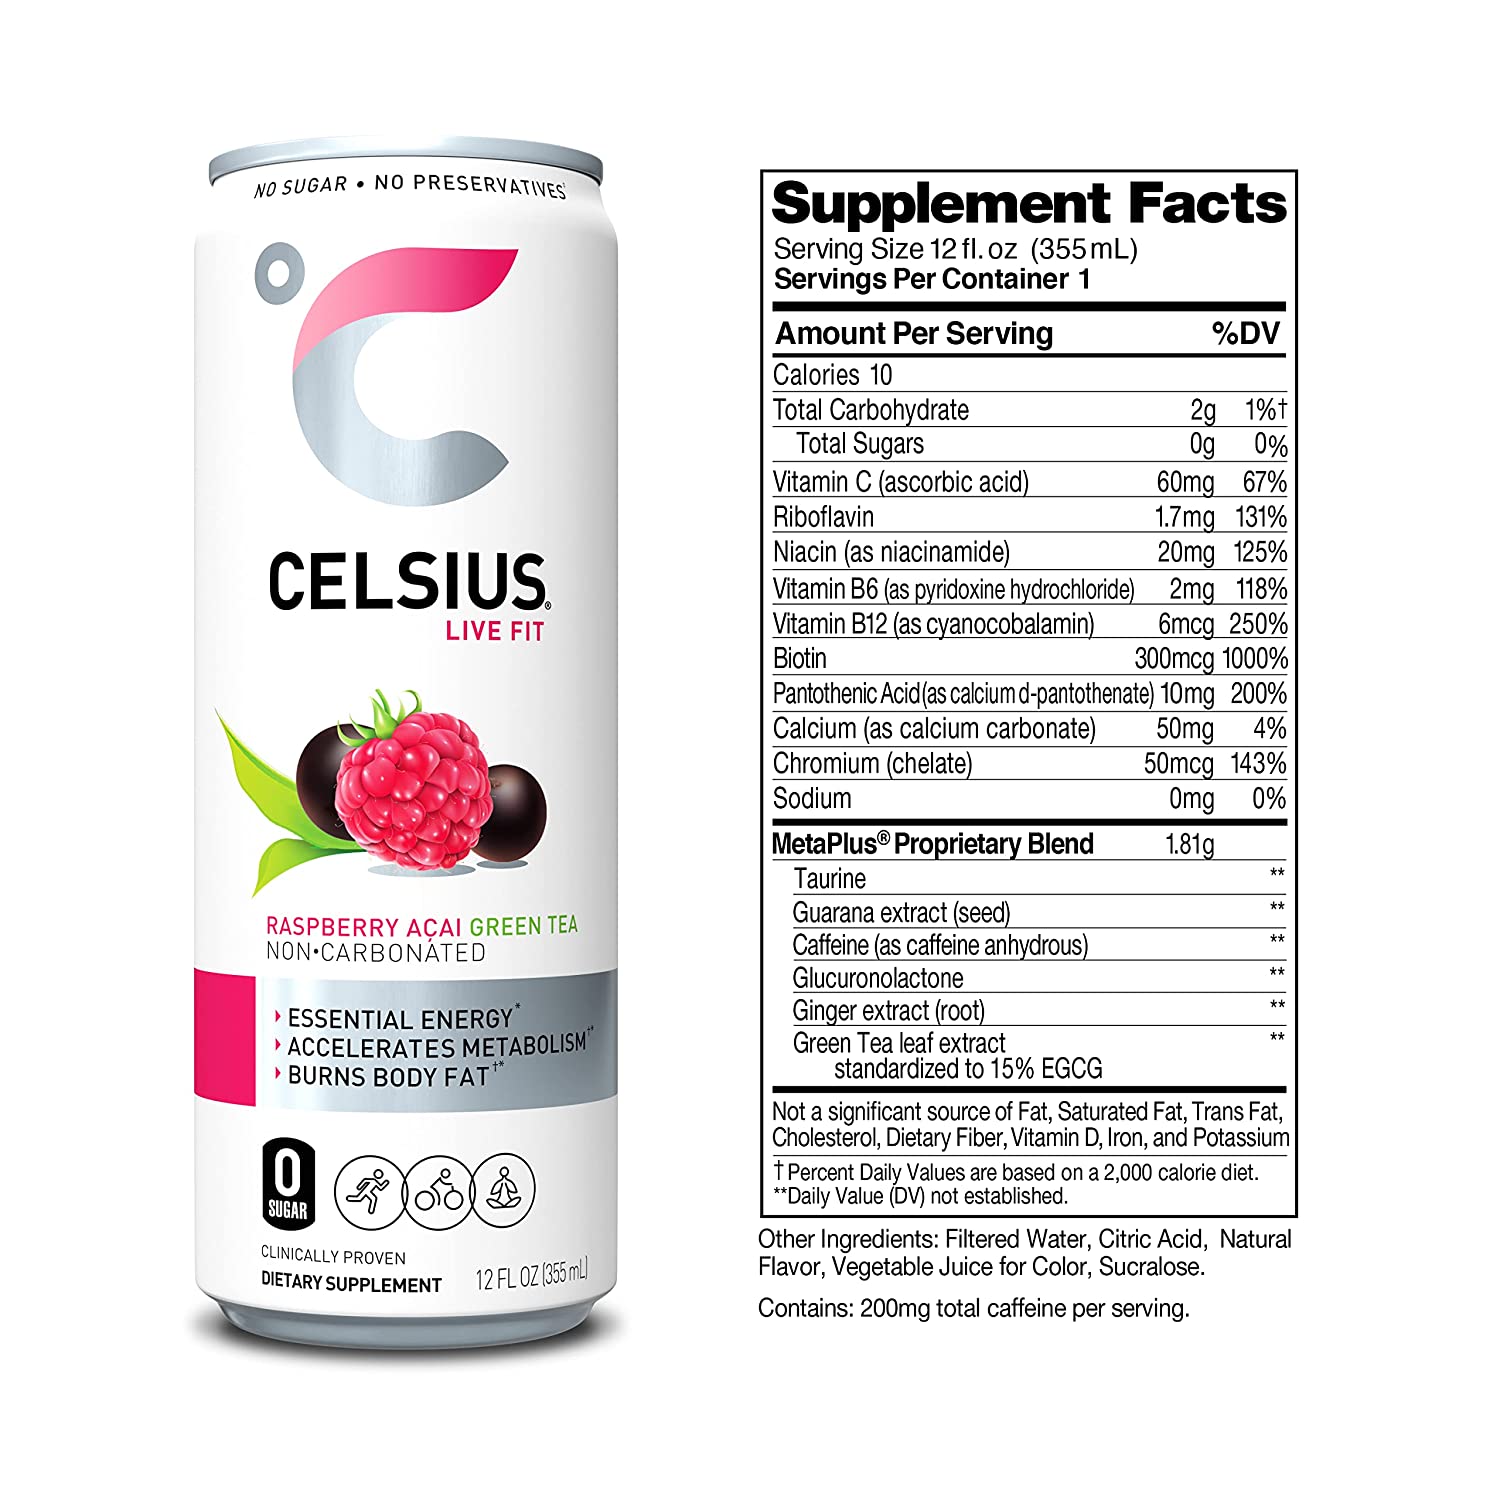 Celsius Energy Drink - Sparkling Essential Fitness Drink - 12x355ml